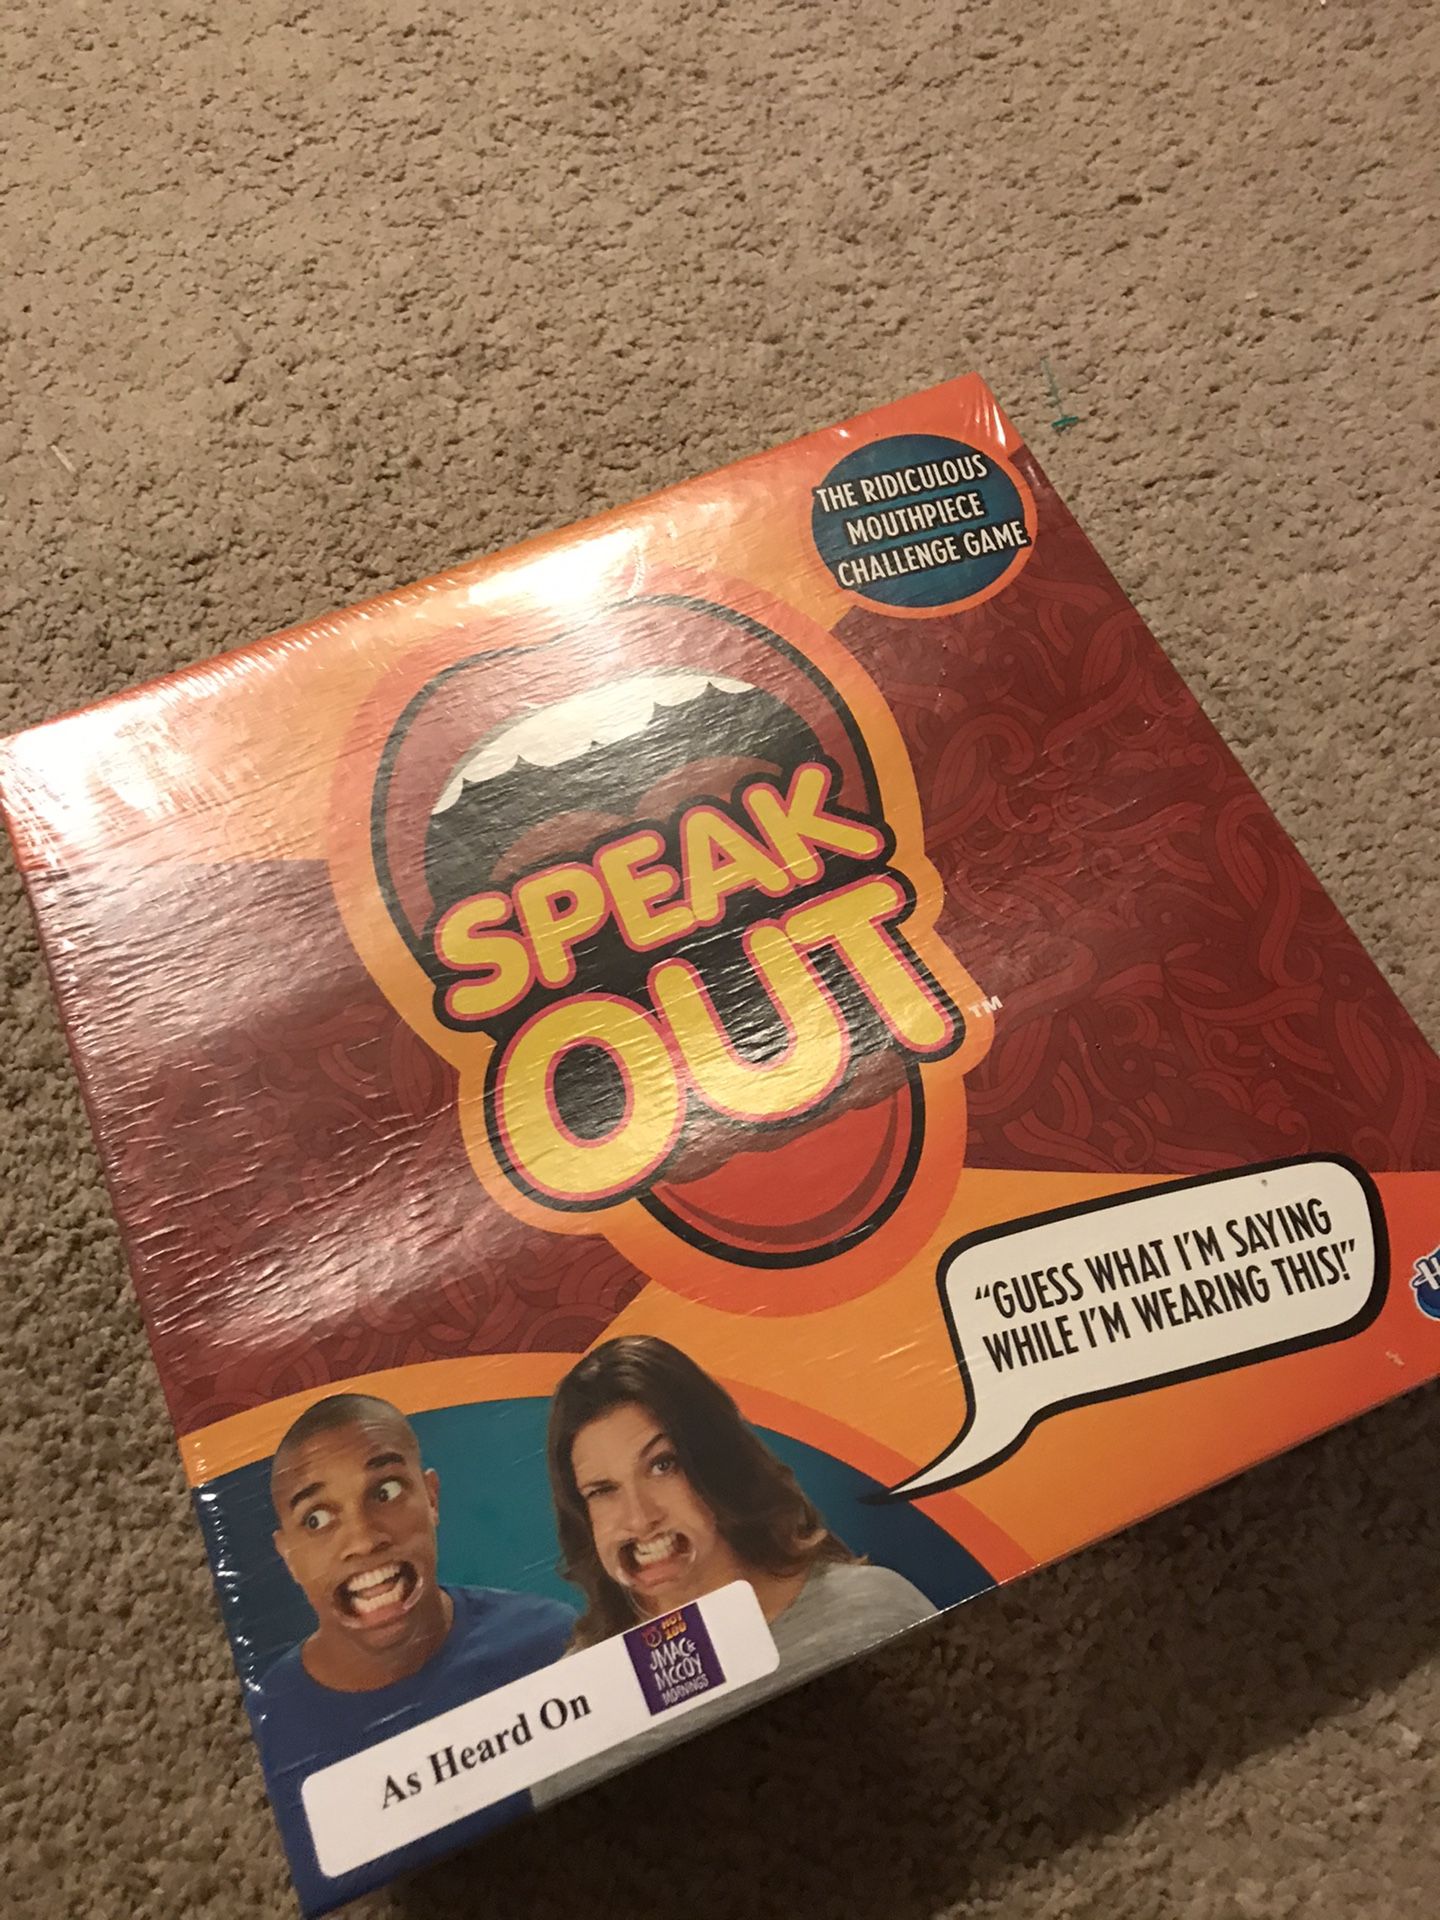 New Speak out game